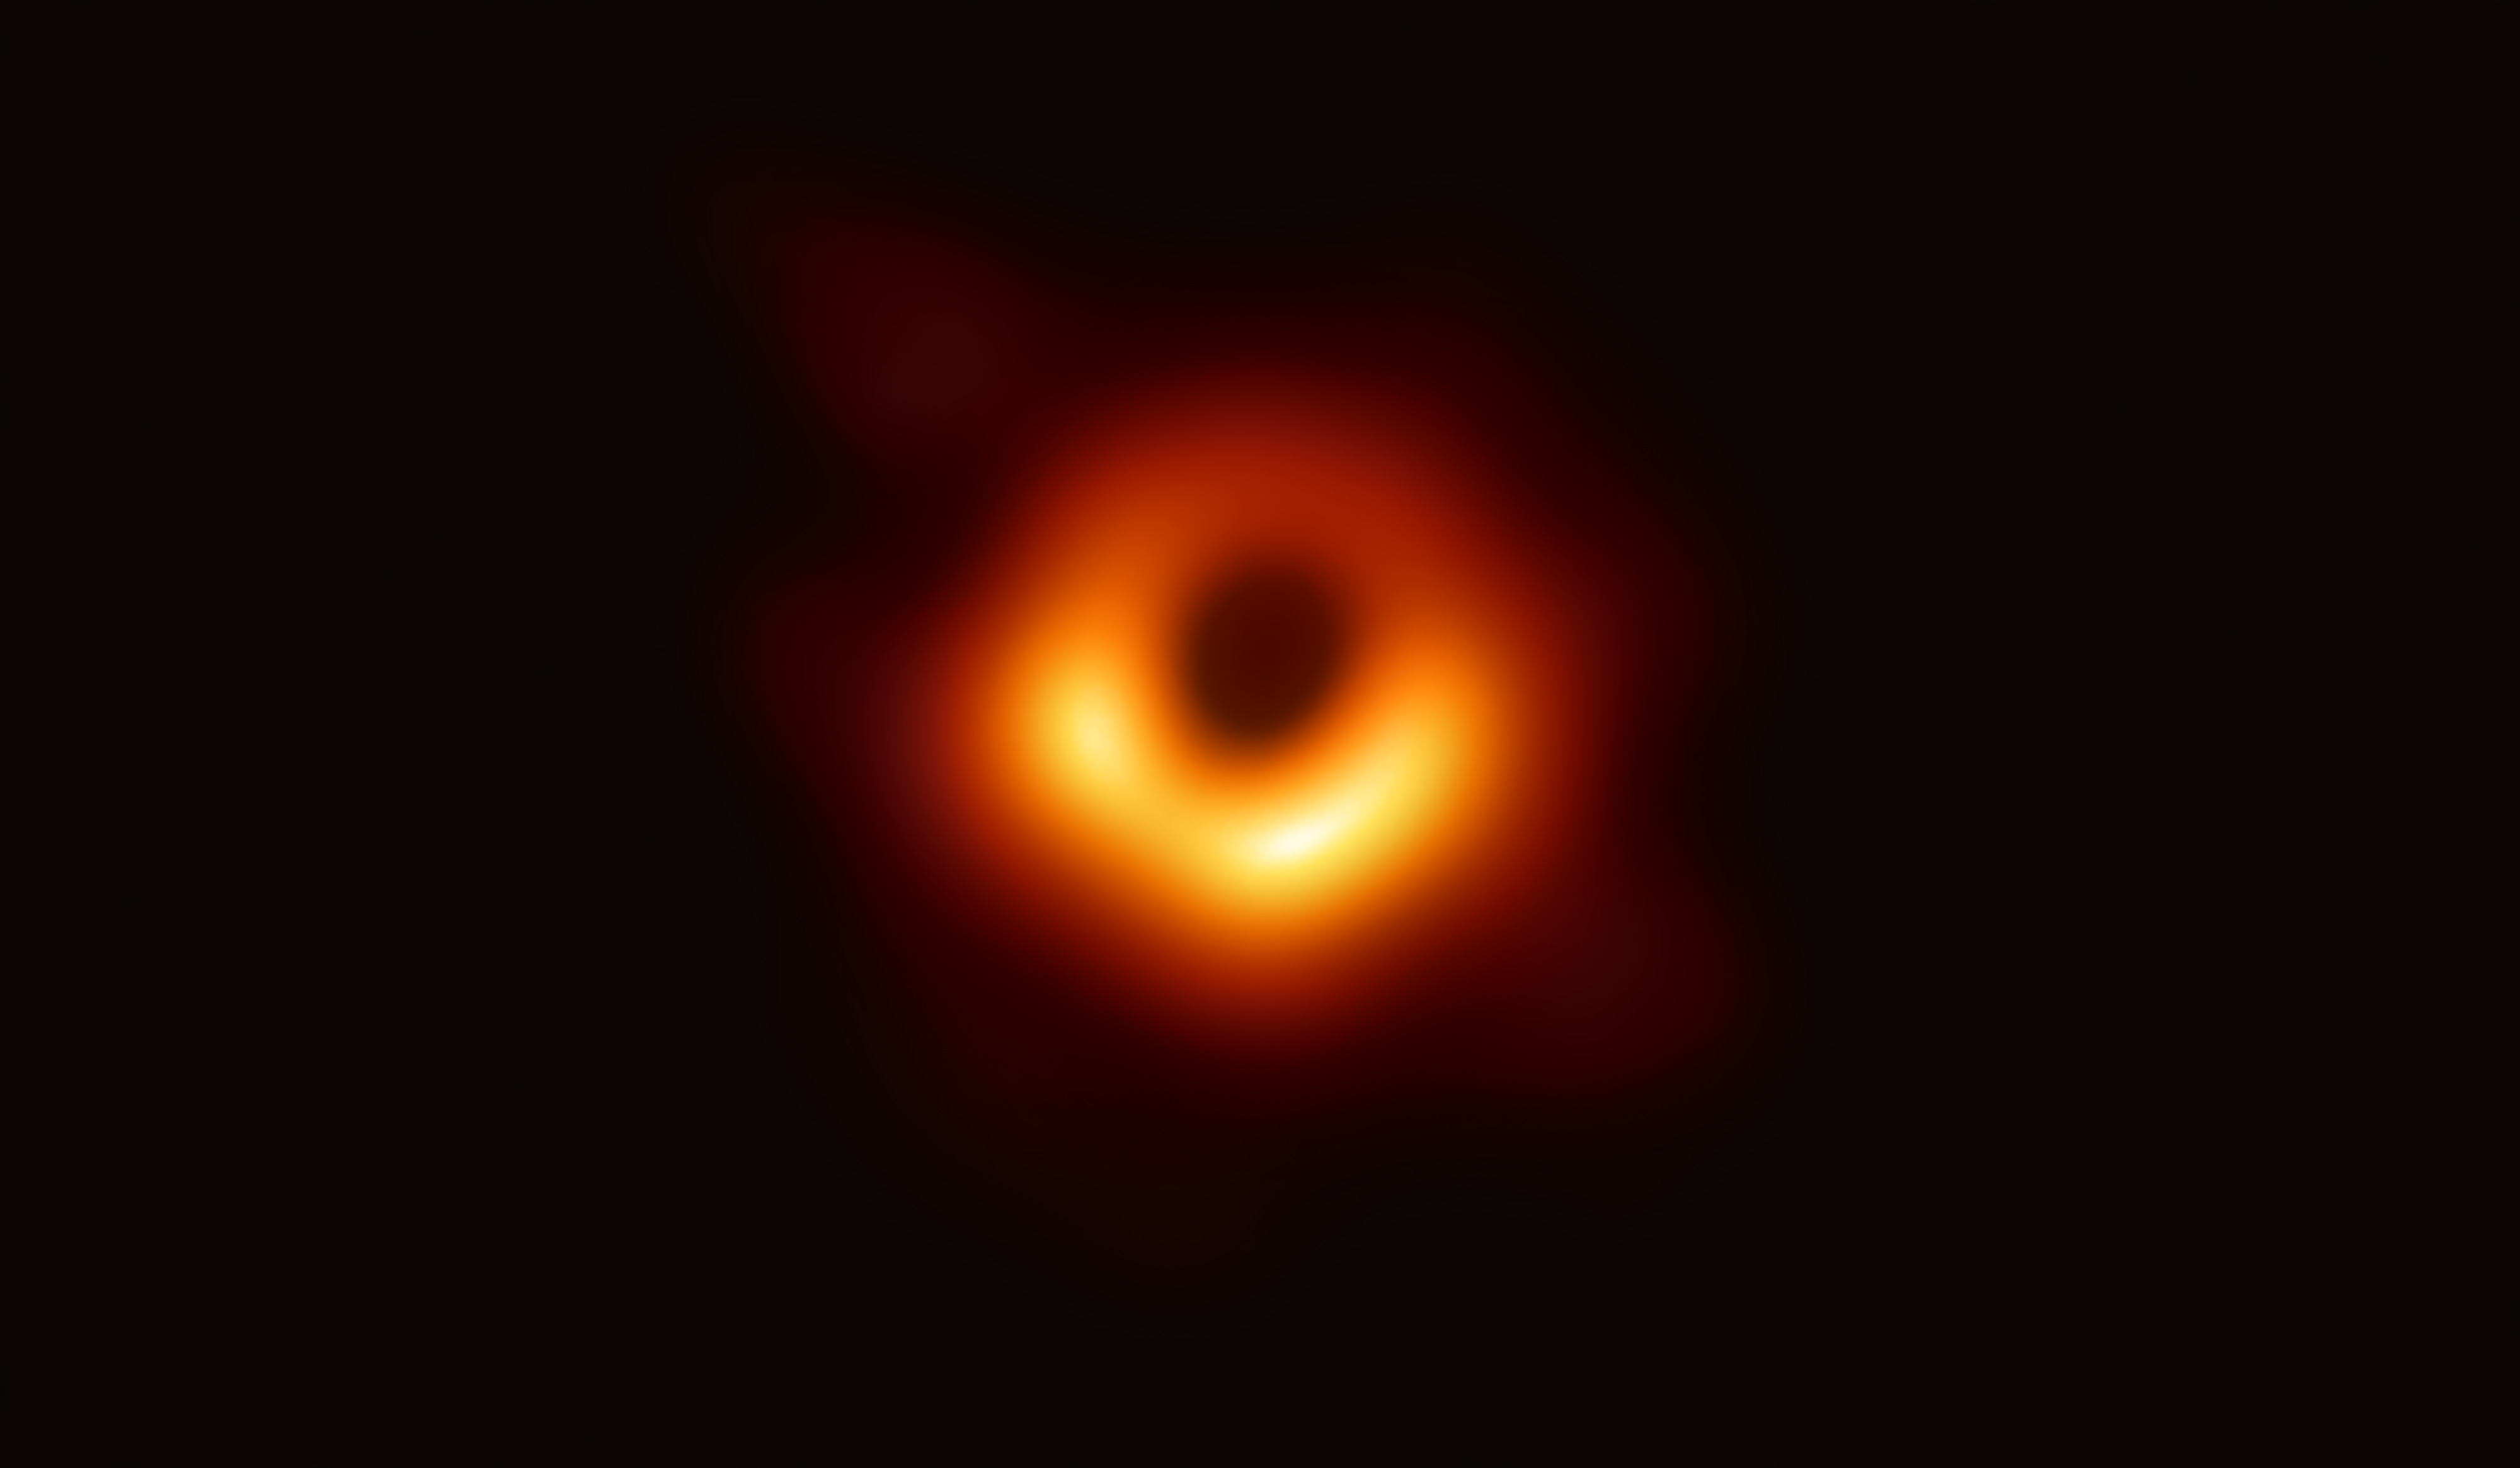 Released in April 10, 2019, the first image ever made of a black hole, resides at the center of Messier 87 galaxy 55 million light-years from Earth and has a mass 6.5-billion times that of the Sun, is produced by capturing high-frequency radio waves using the Event Horizon Telescope network of radio telescopes across the planet that functions like a single instrument.